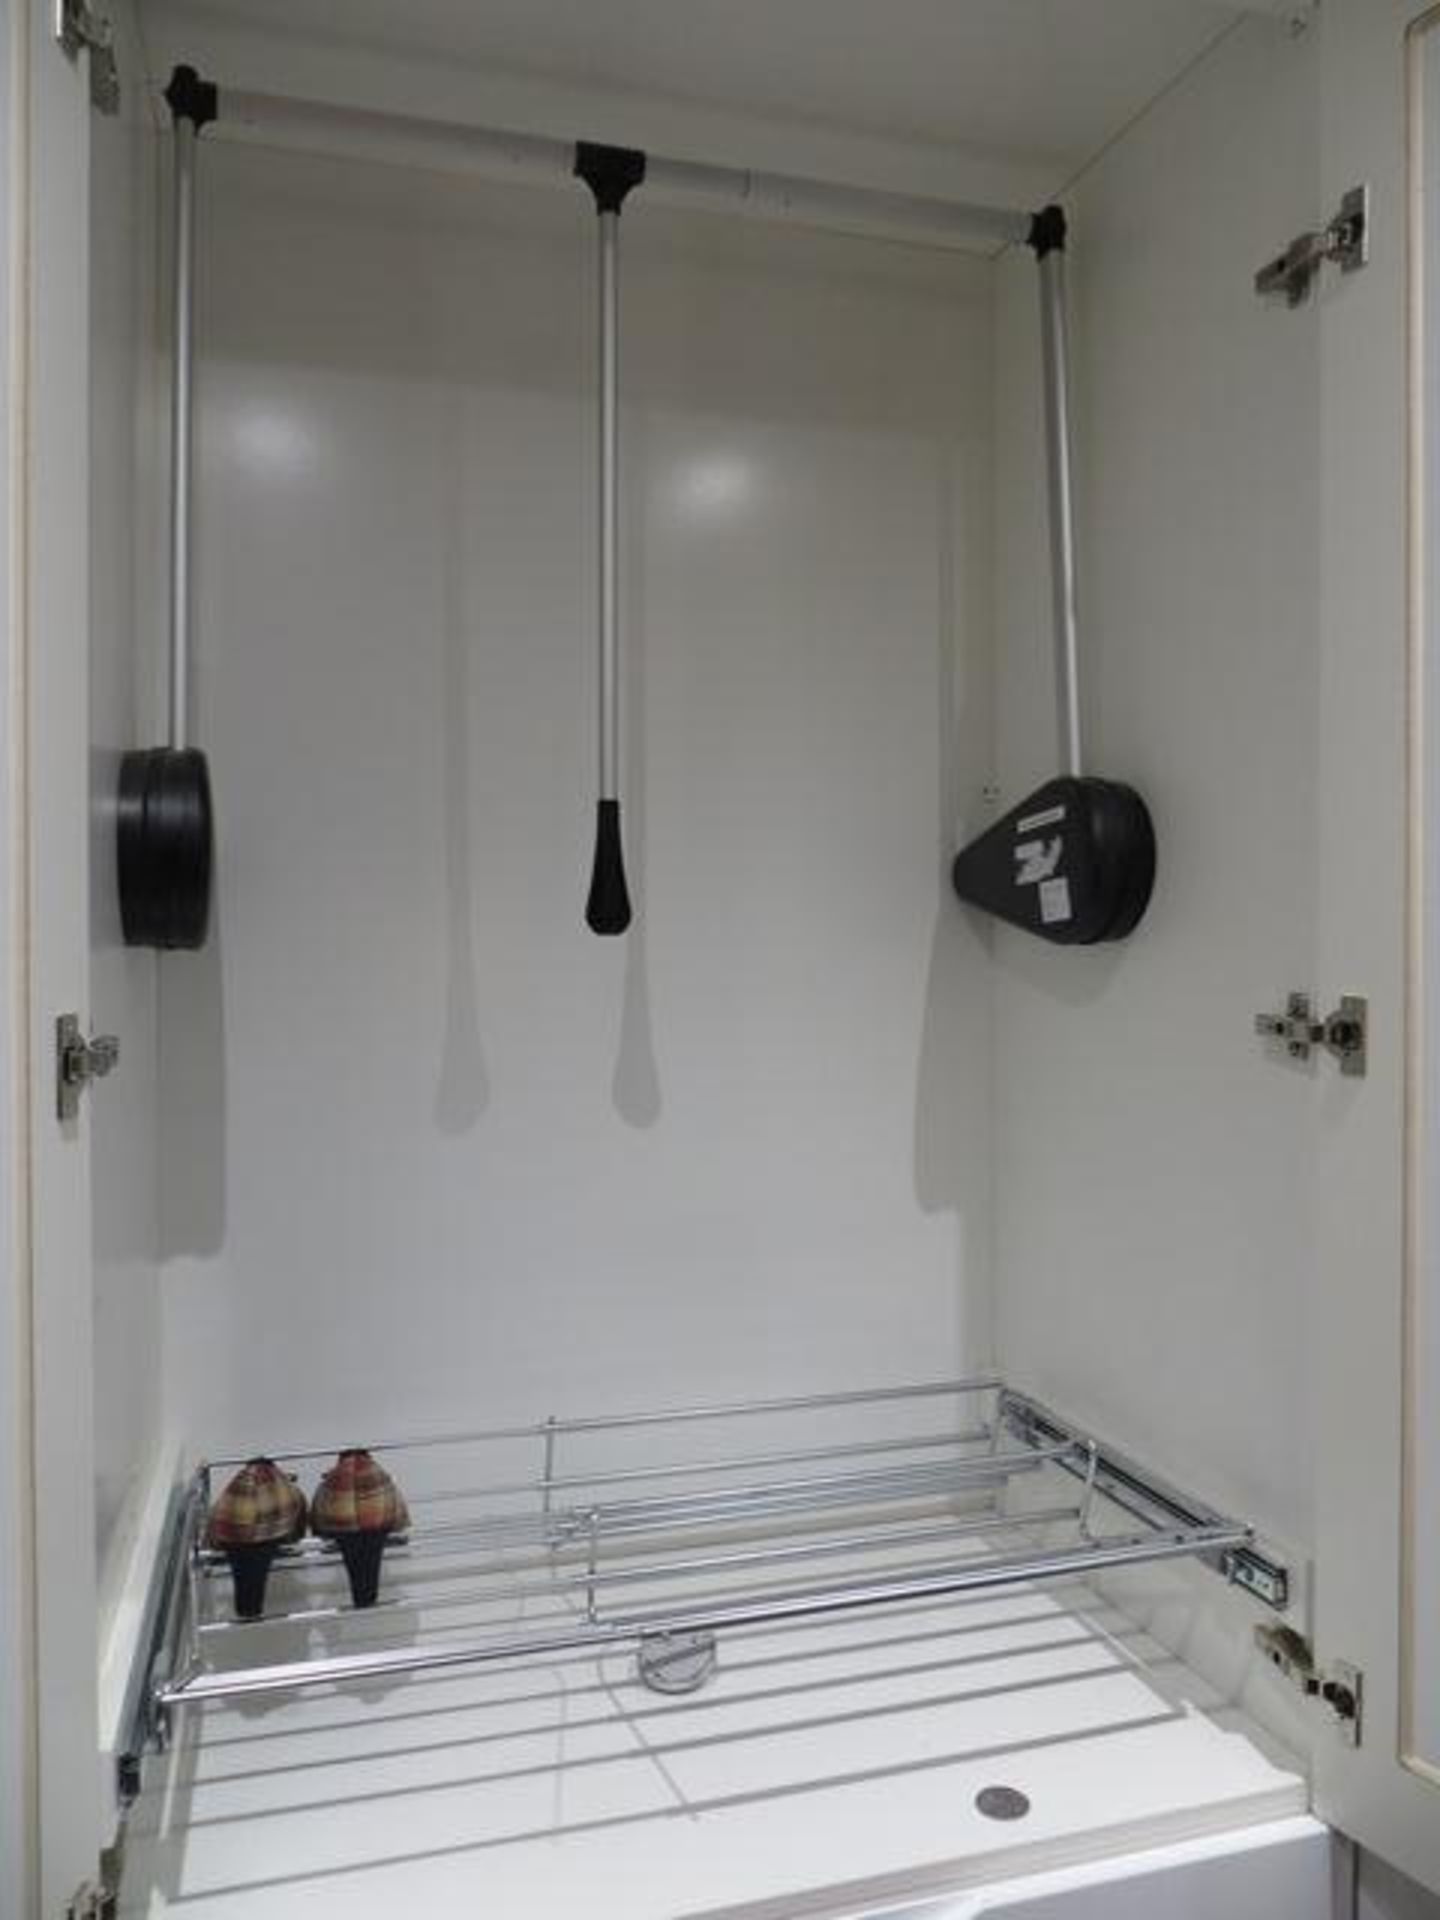 Bespoke white gloss wardrobe unit with 5 doors (2 mirrored) with Sprung loaded pull down wardrobe ra - Image 3 of 6